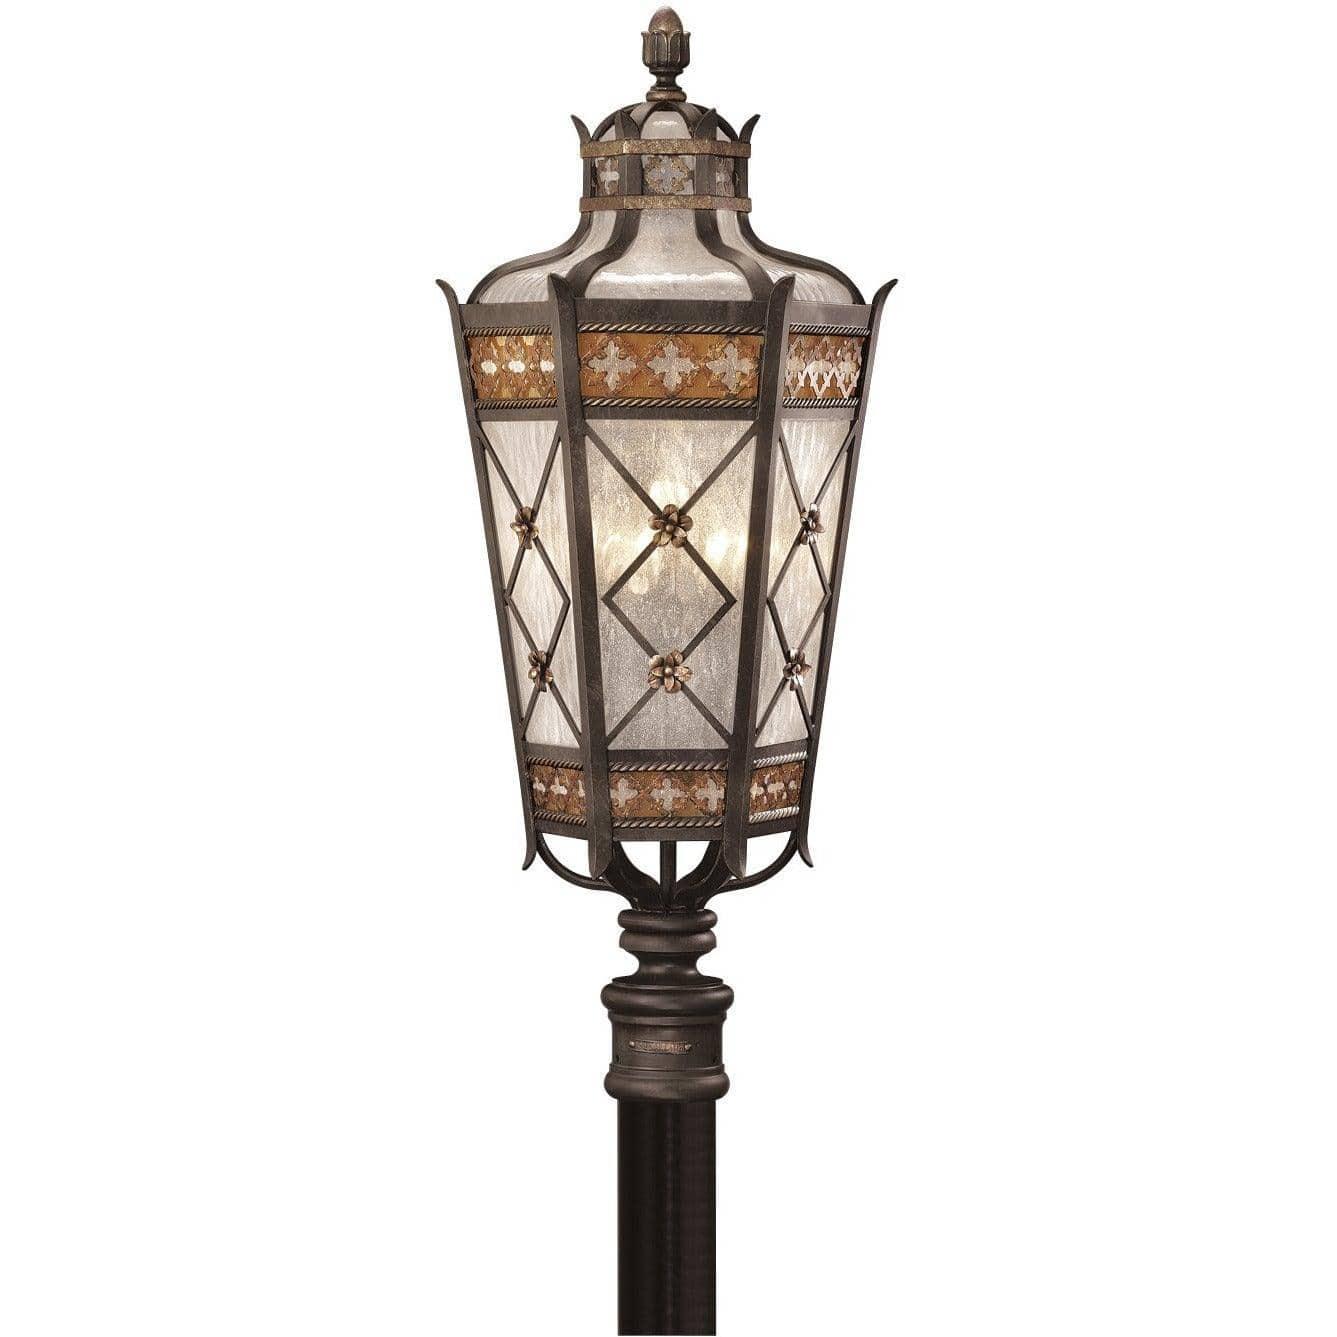 Fine Art Handcrafted Lighting - Chateau Outdoor 32-Inch Five Light Outdoor Post Mount - 541680ST | Montreal Lighting & Hardware